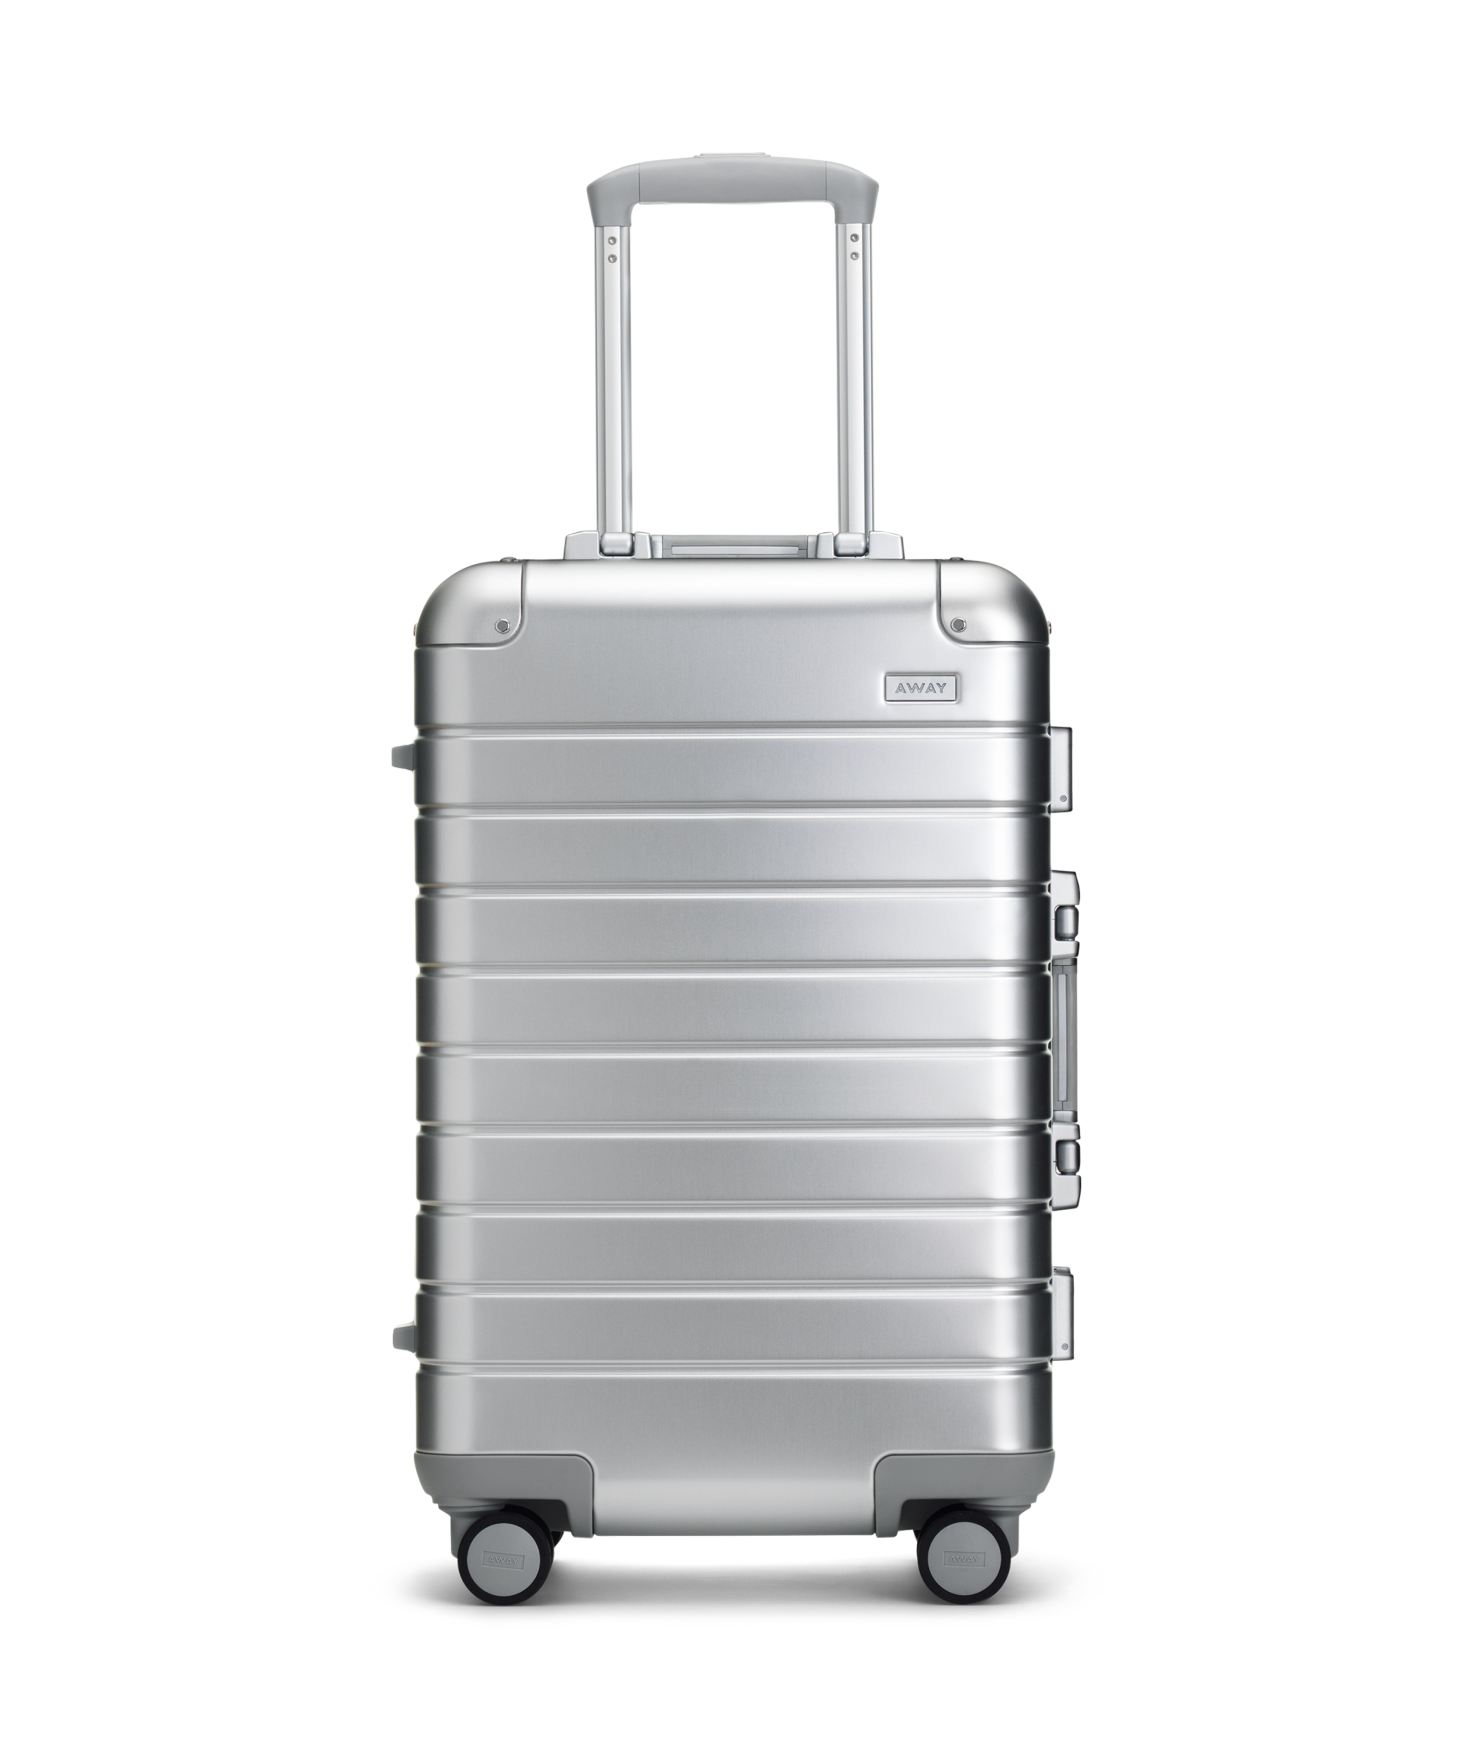 Compare Carry-On Sizes  Away: Built for modern travel